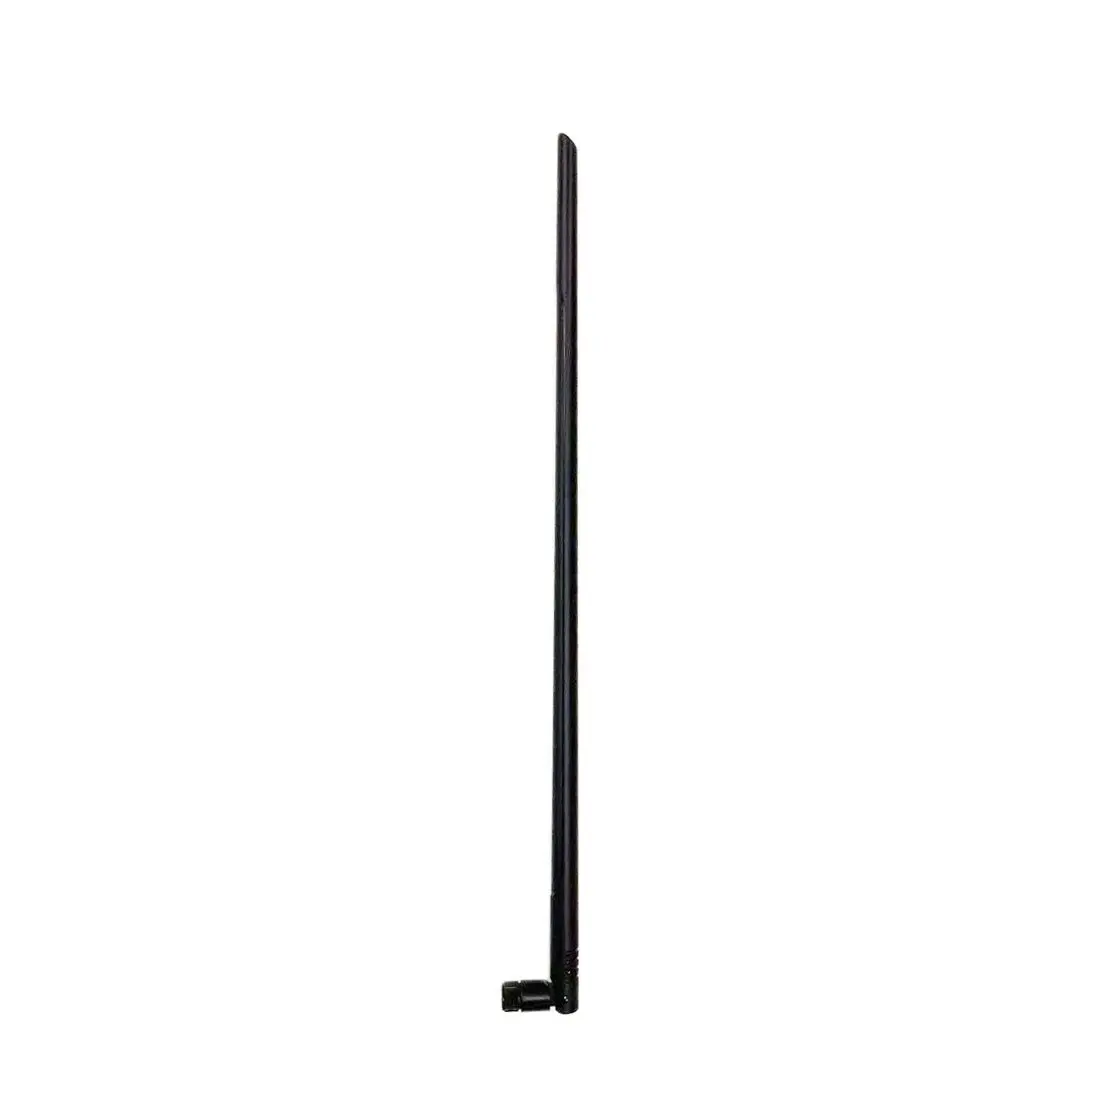 

1pc 2.4GHz 12dBi High Gain Wifi Antenna SMA Male/RP SMA Connector Wireless WLAN Black Floding Omni Router Booster 45cm Long